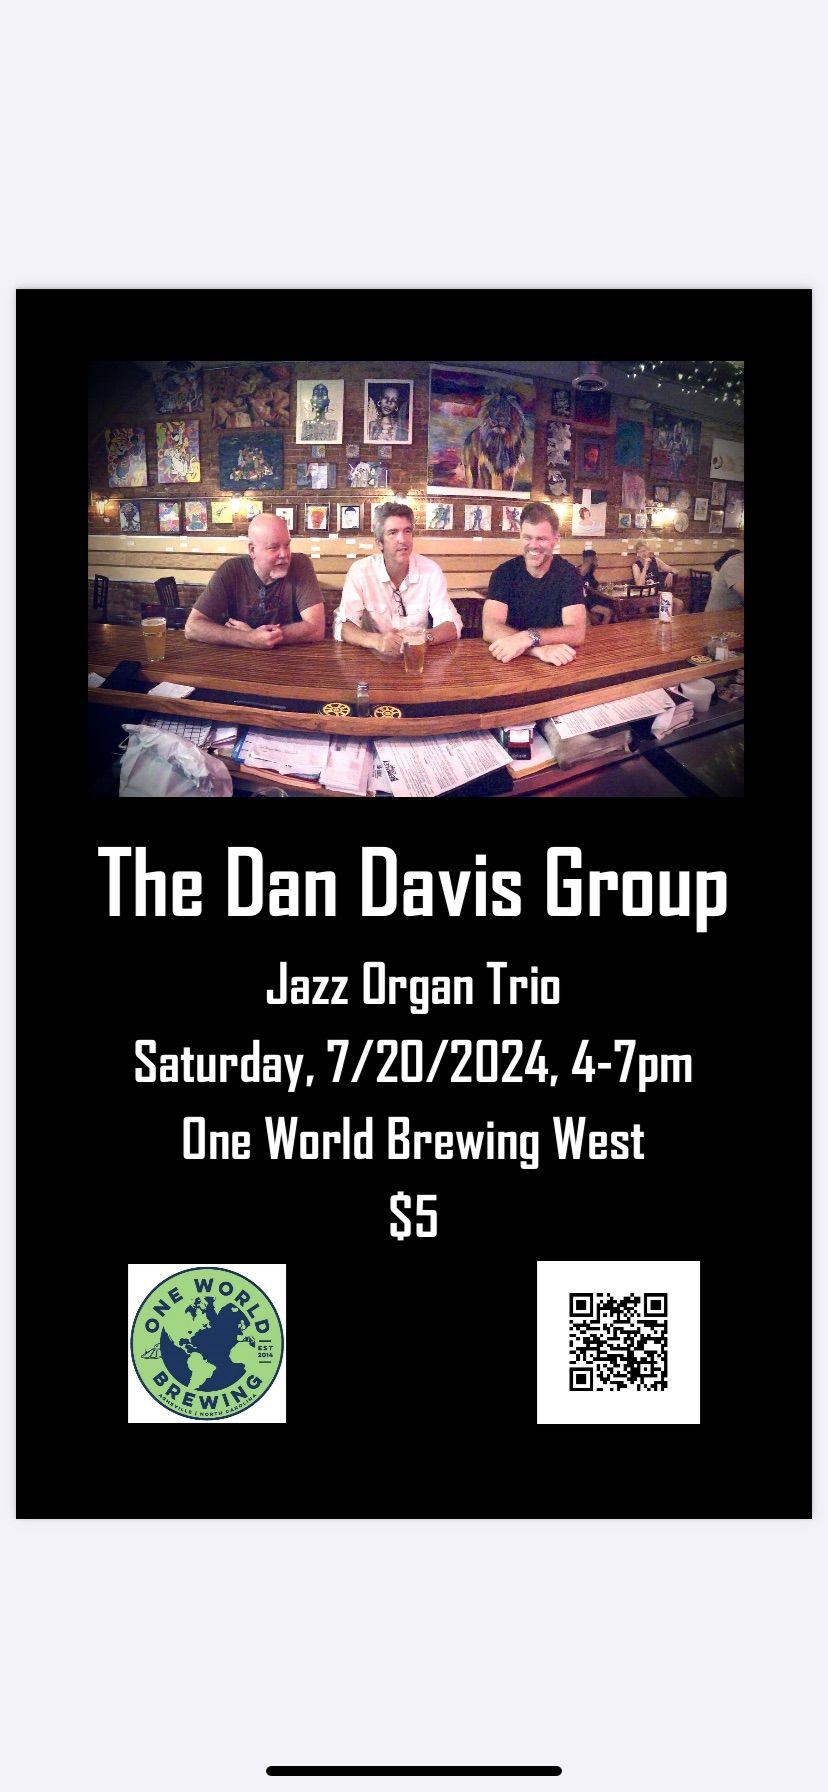 The Dan Davis Group at One World Brewing West